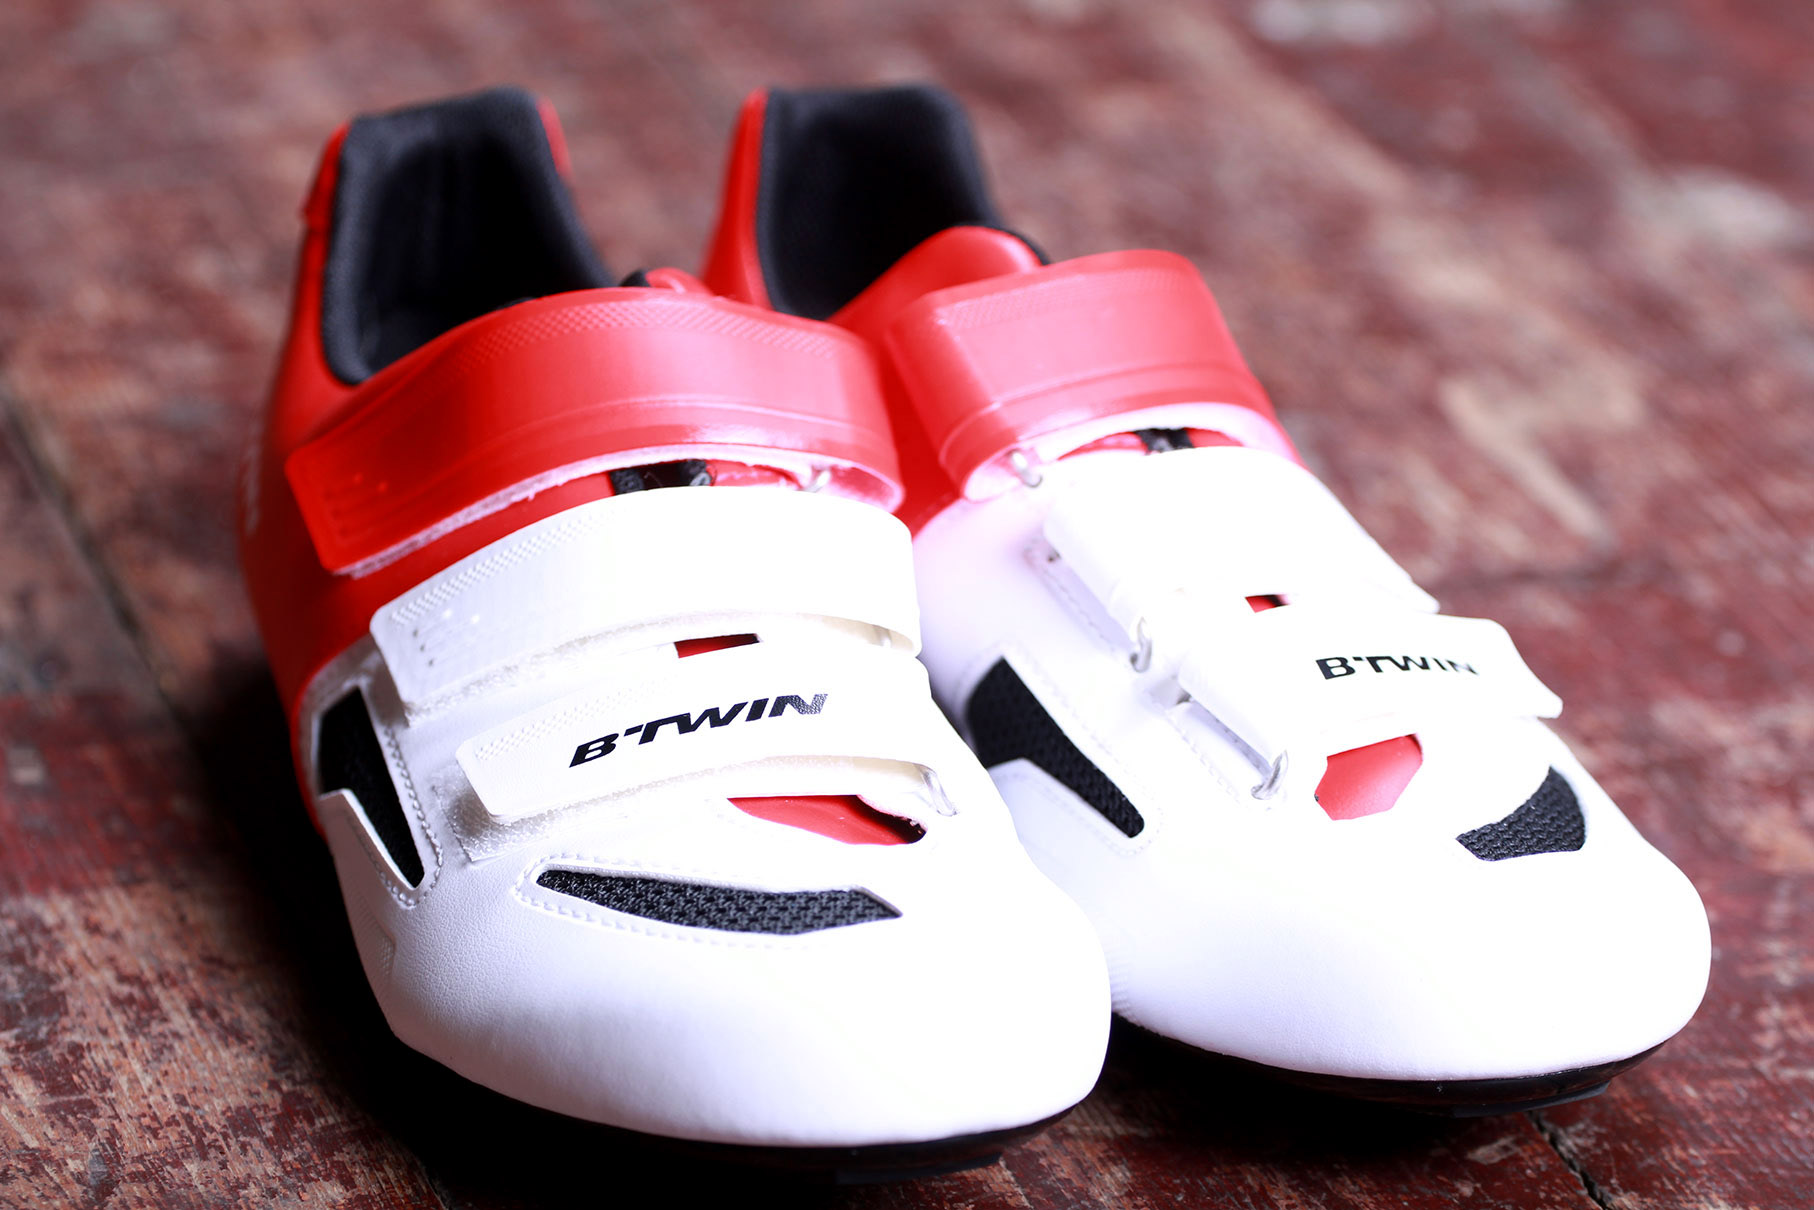 btwin 9 cycling shoes